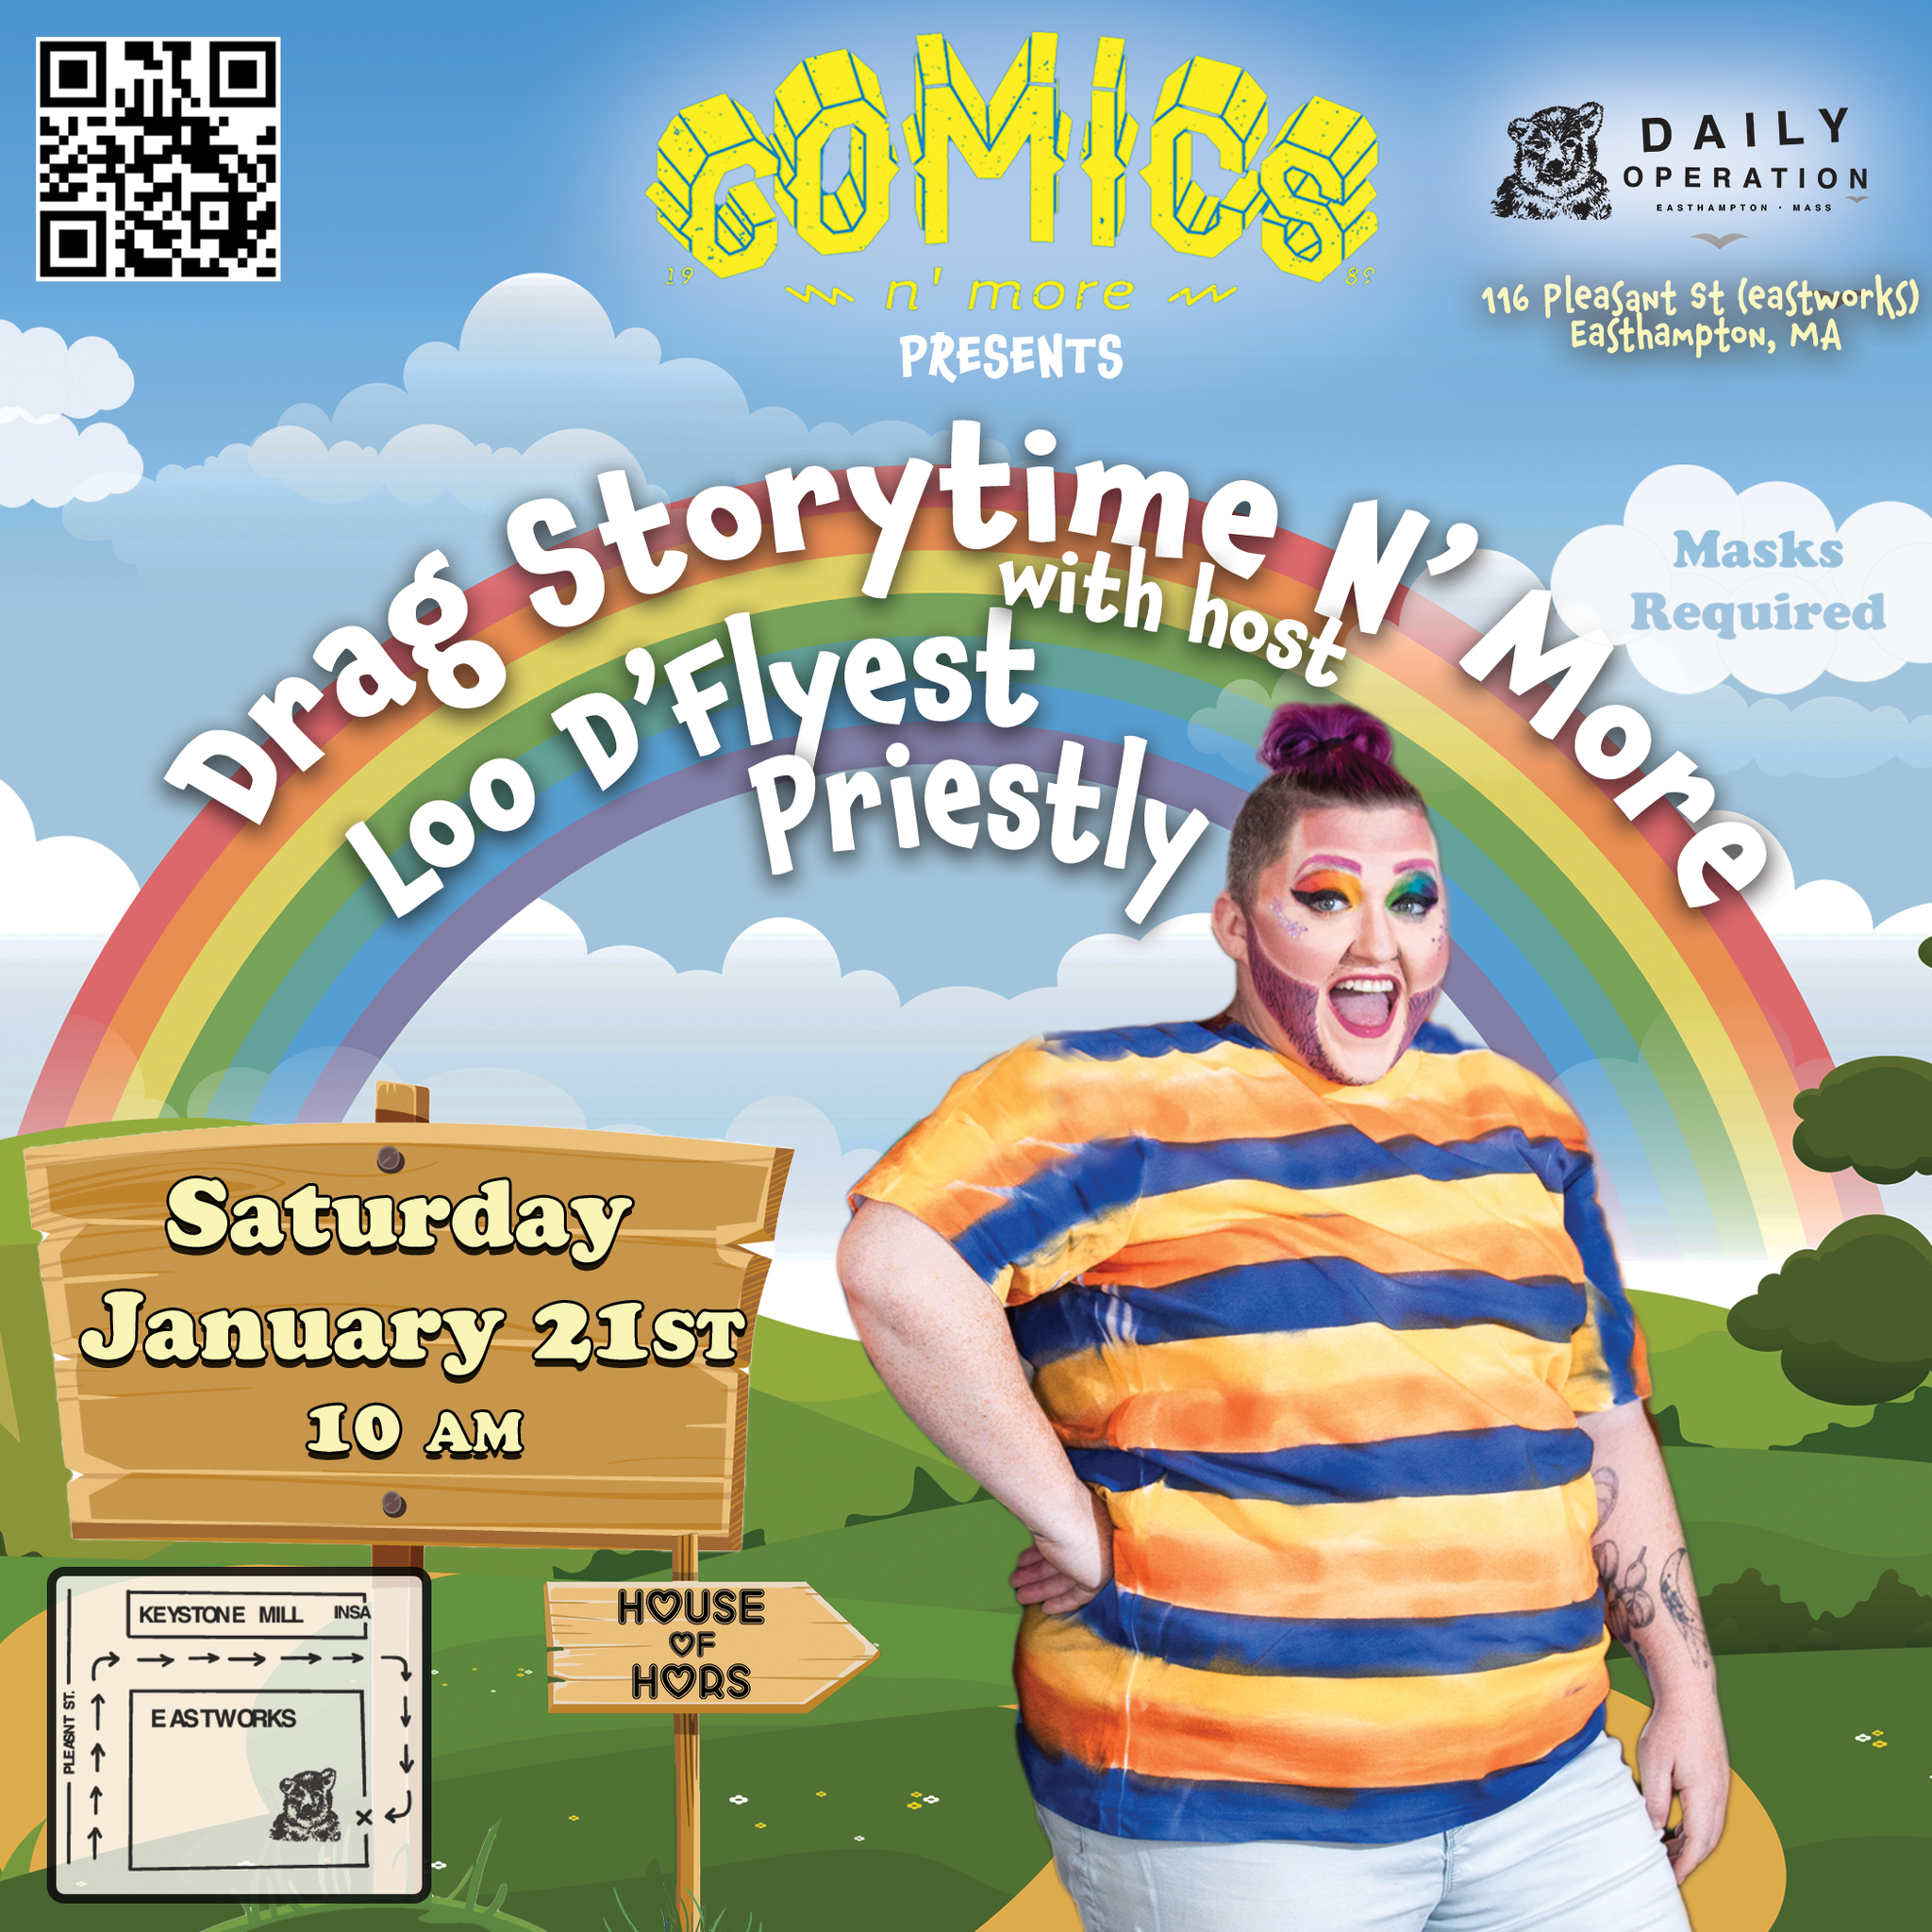 A promotional image for Comics N'Mores Drag Storytime N'More. Featuring a picture of our host, Loo D'Flyest Priestly. She's wearing a colorful striped shirt. Behind her is a rainbow. In bottom left corner there's a map showing how to get to the event space at Daily Operation (behind the Eastworks building)